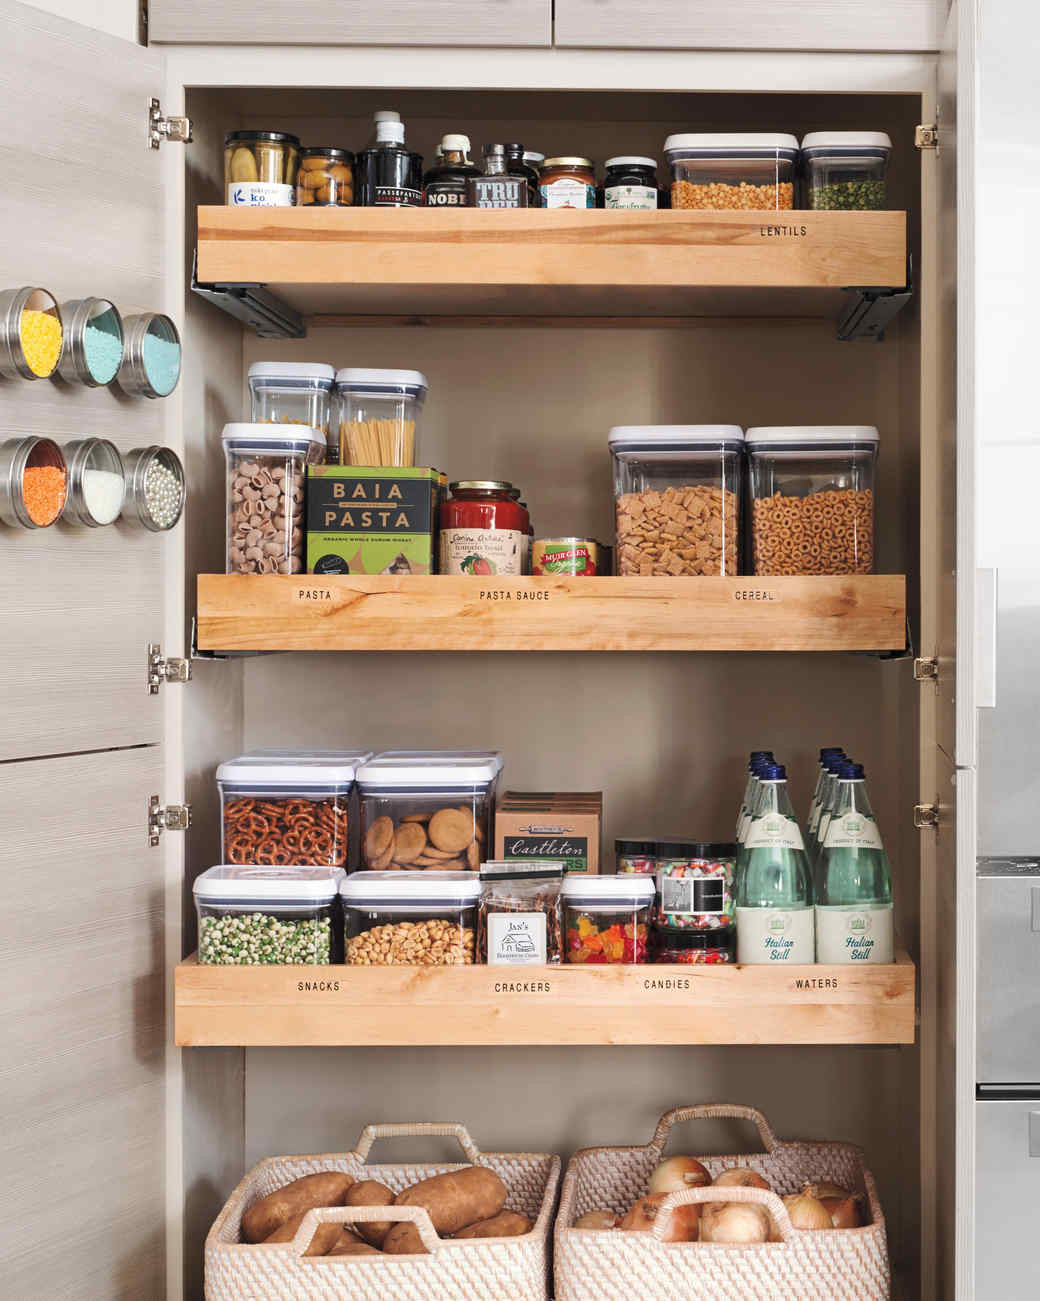 Storage Ideas For Small Kitchen
 Small Kitchen Storage Ideas for a More Efficient Space